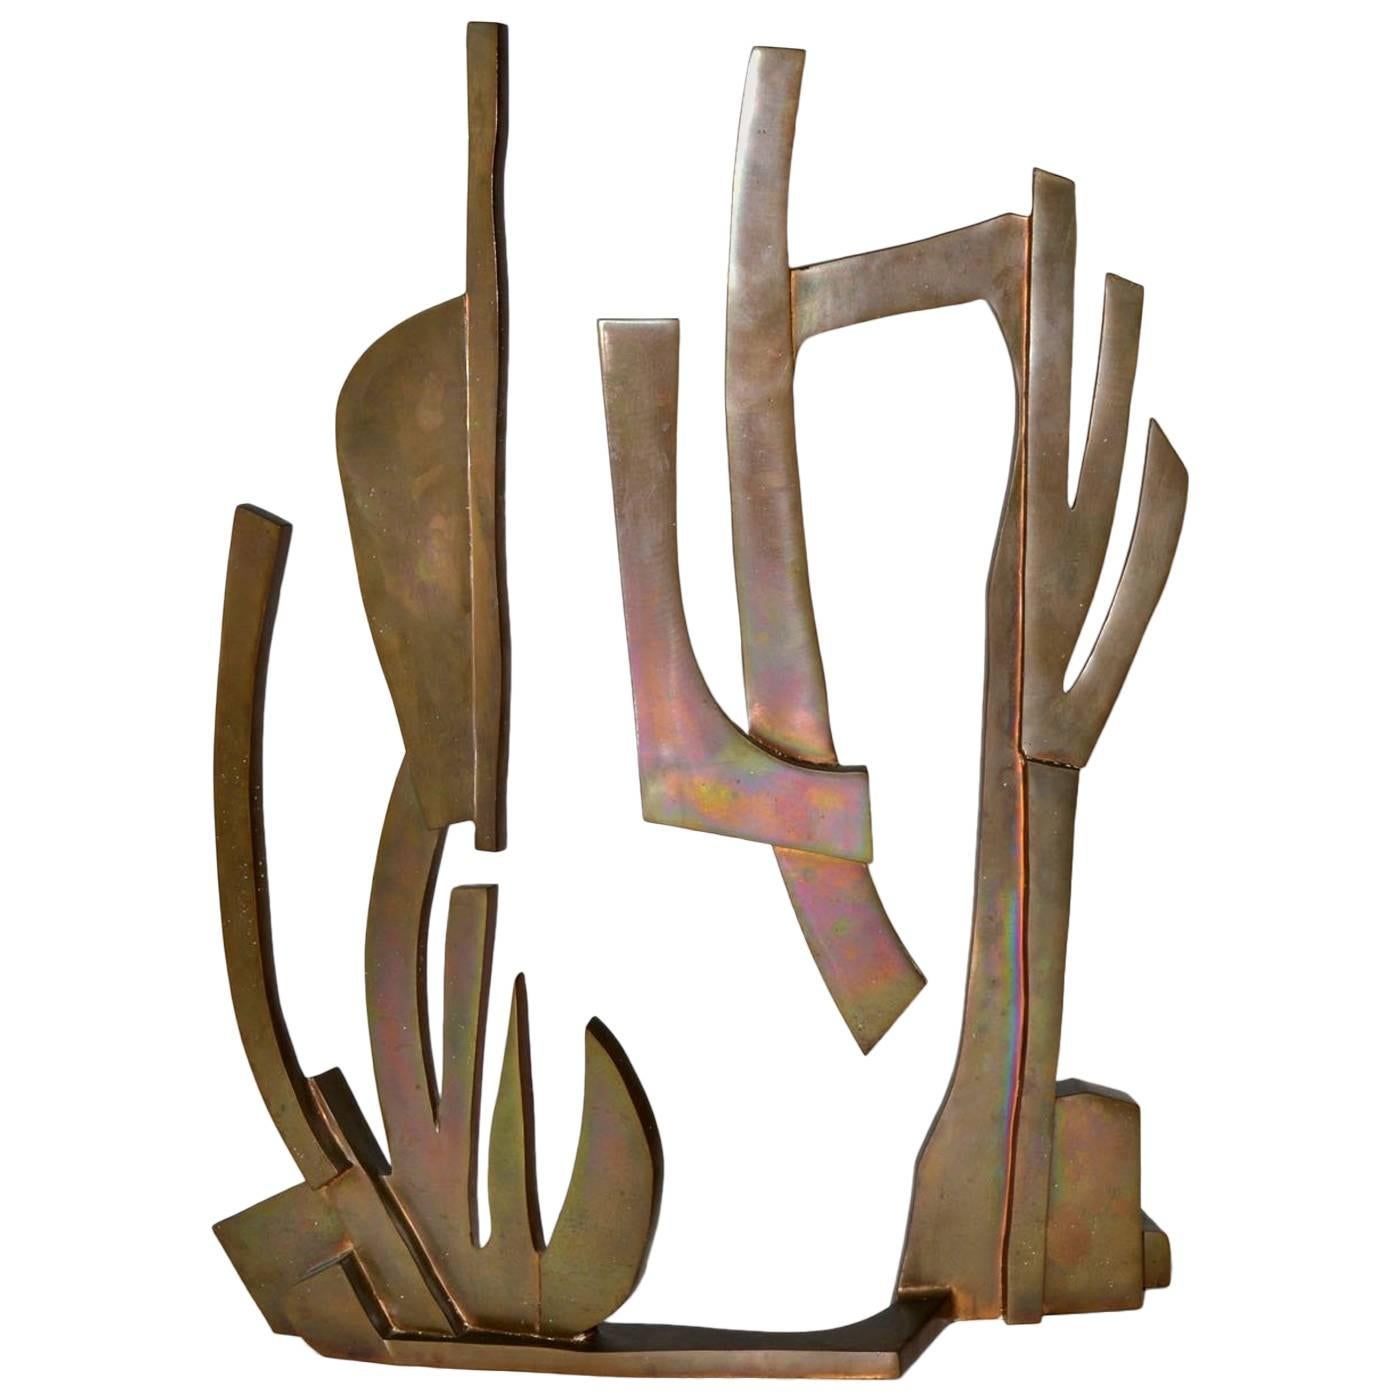 Large Modern Abstract Bronze Sculpture by Oded Halahmy, New York, 1977